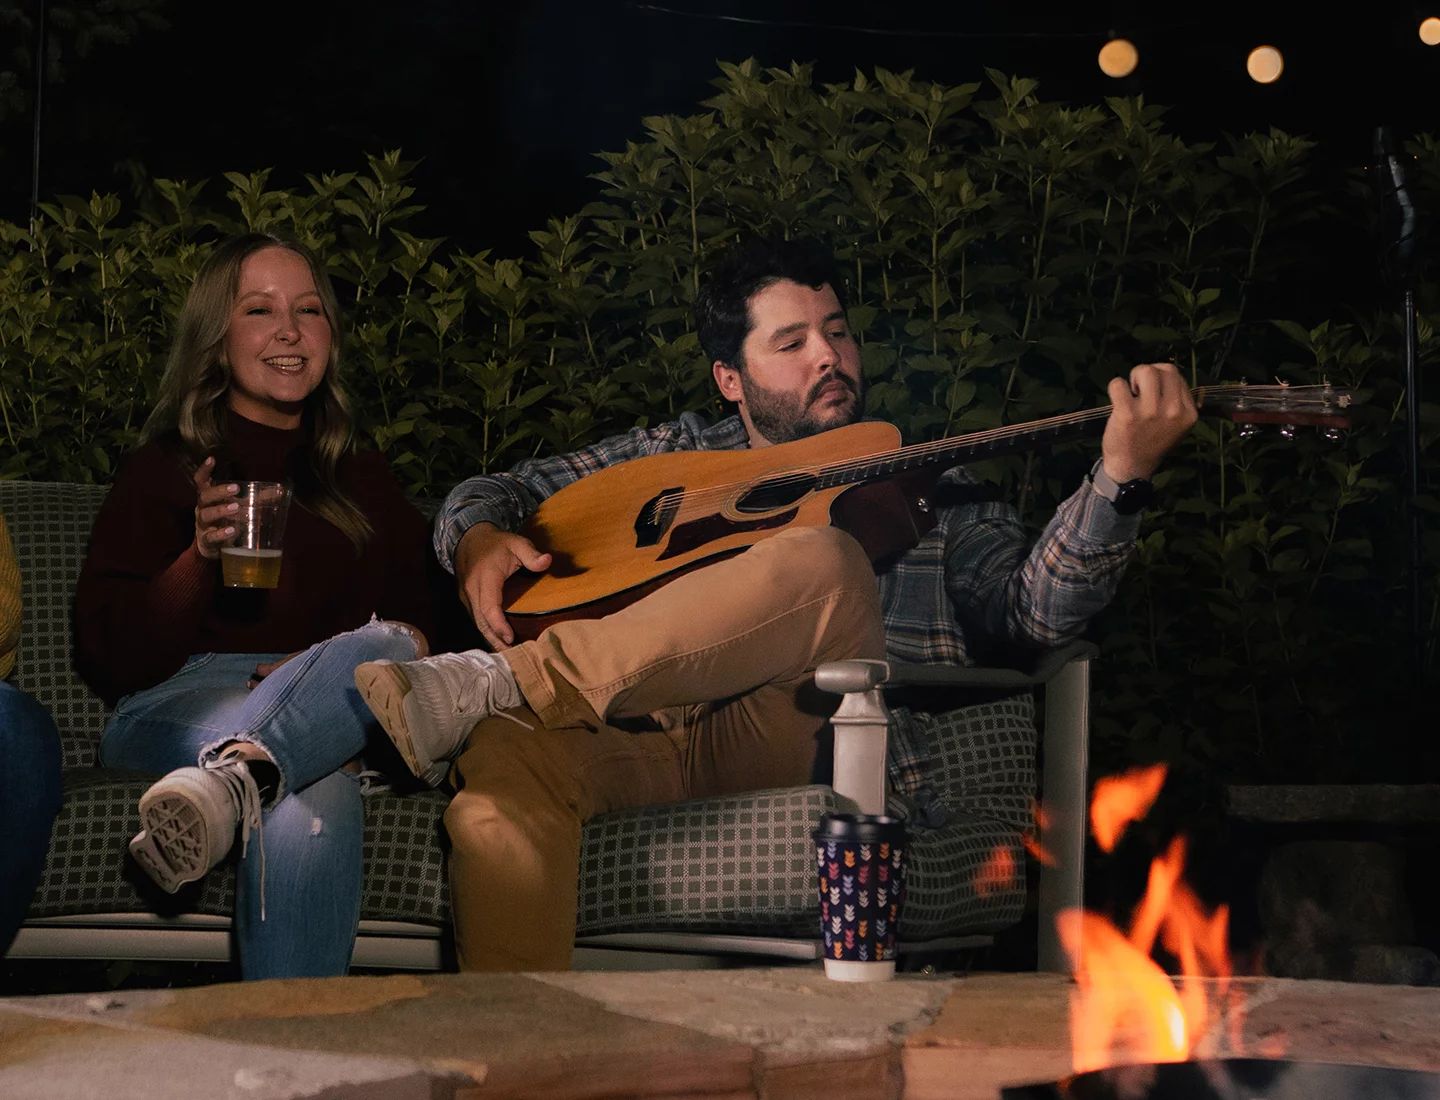 Man holding a guitar sitting with friends around a bonfire